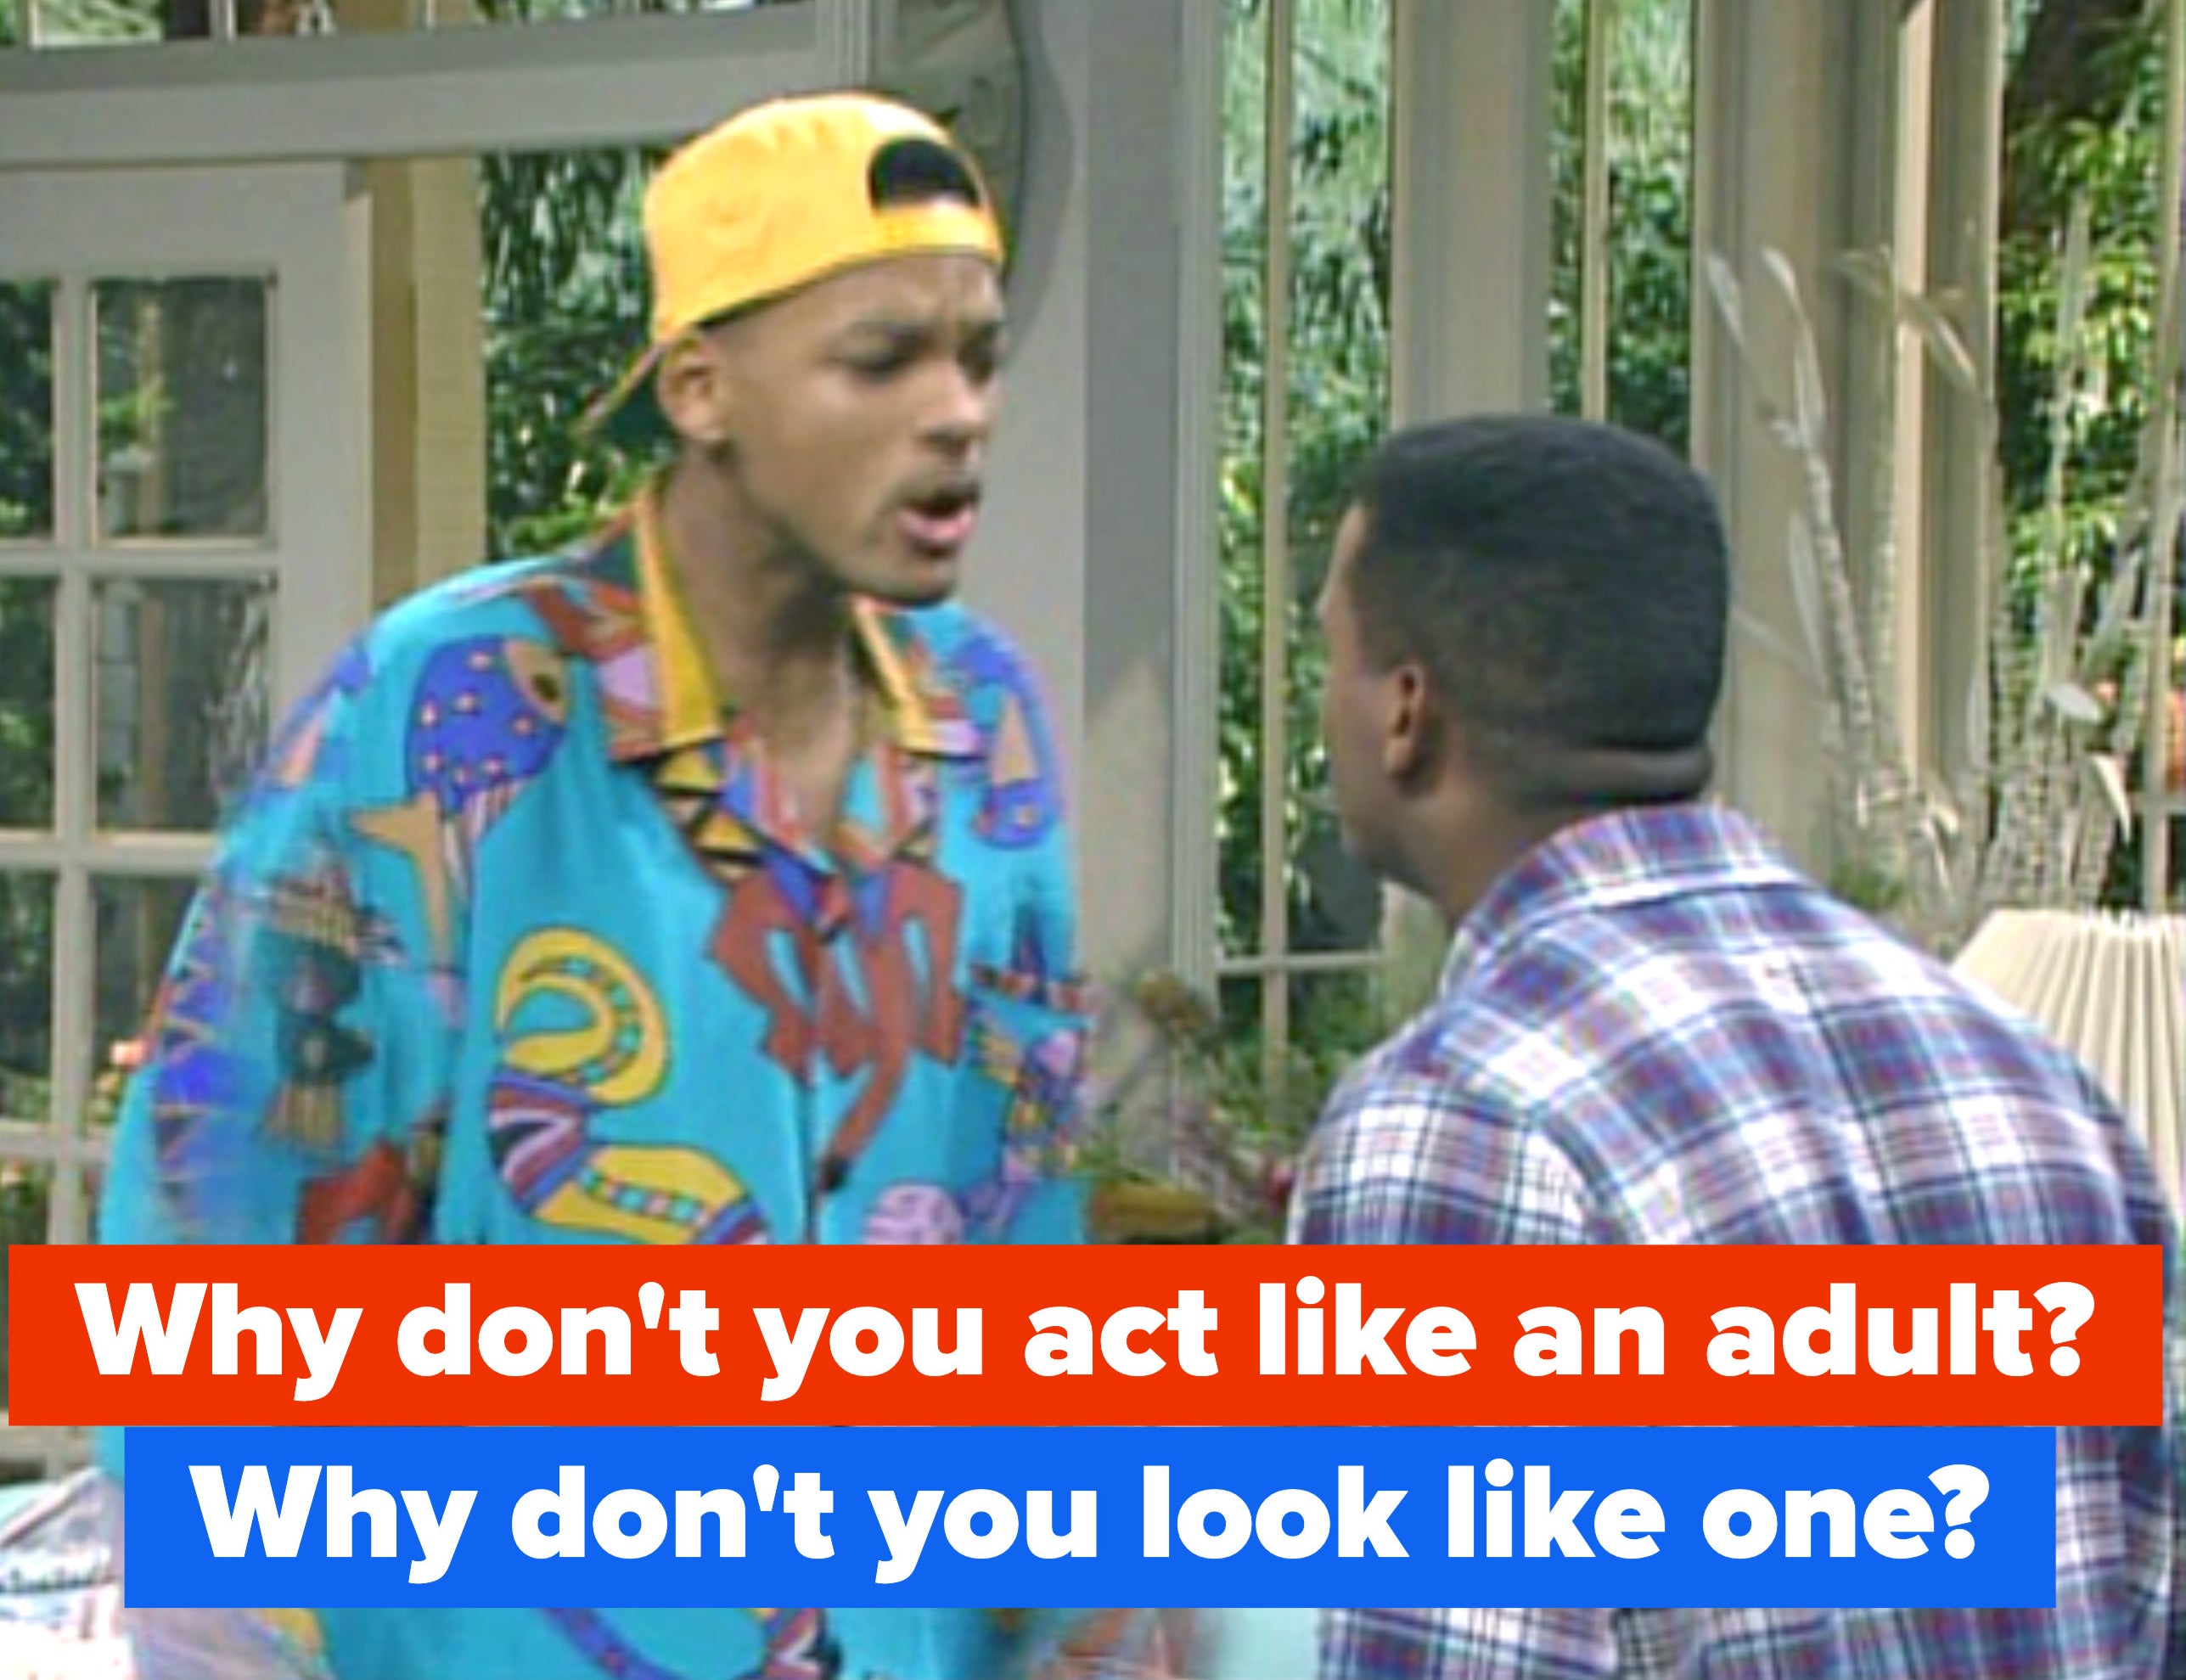 Carlton asks why Will doesn&#x27;t act like an adult and Will responds, &quot;Why don&#x27;t you look like one?&quot;